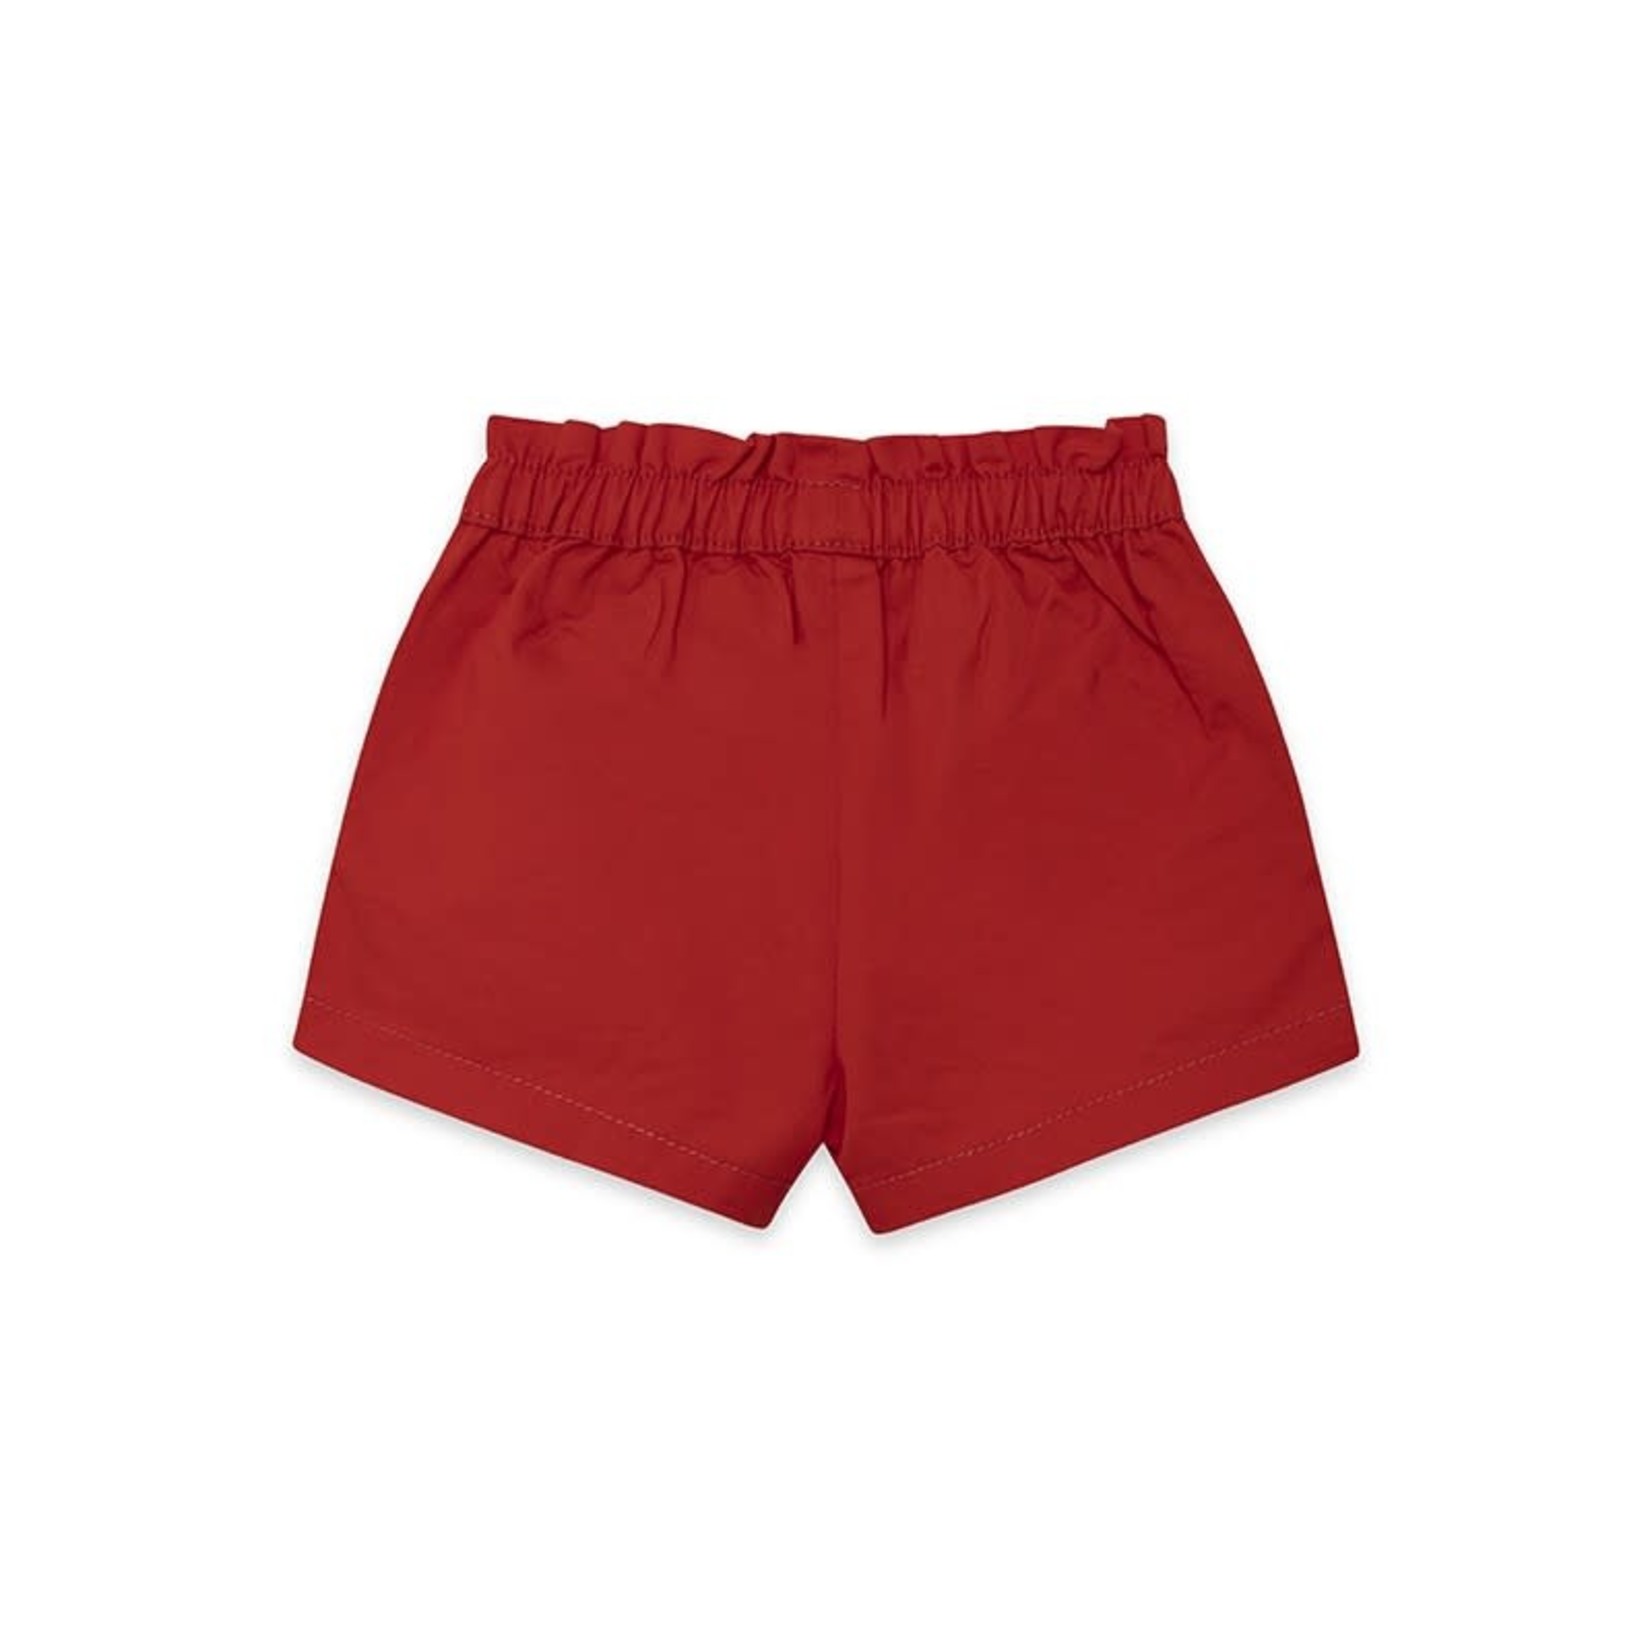 TucTuc TUC TUC - Red twill shorts with gathers and decorative buttons  'Basicos